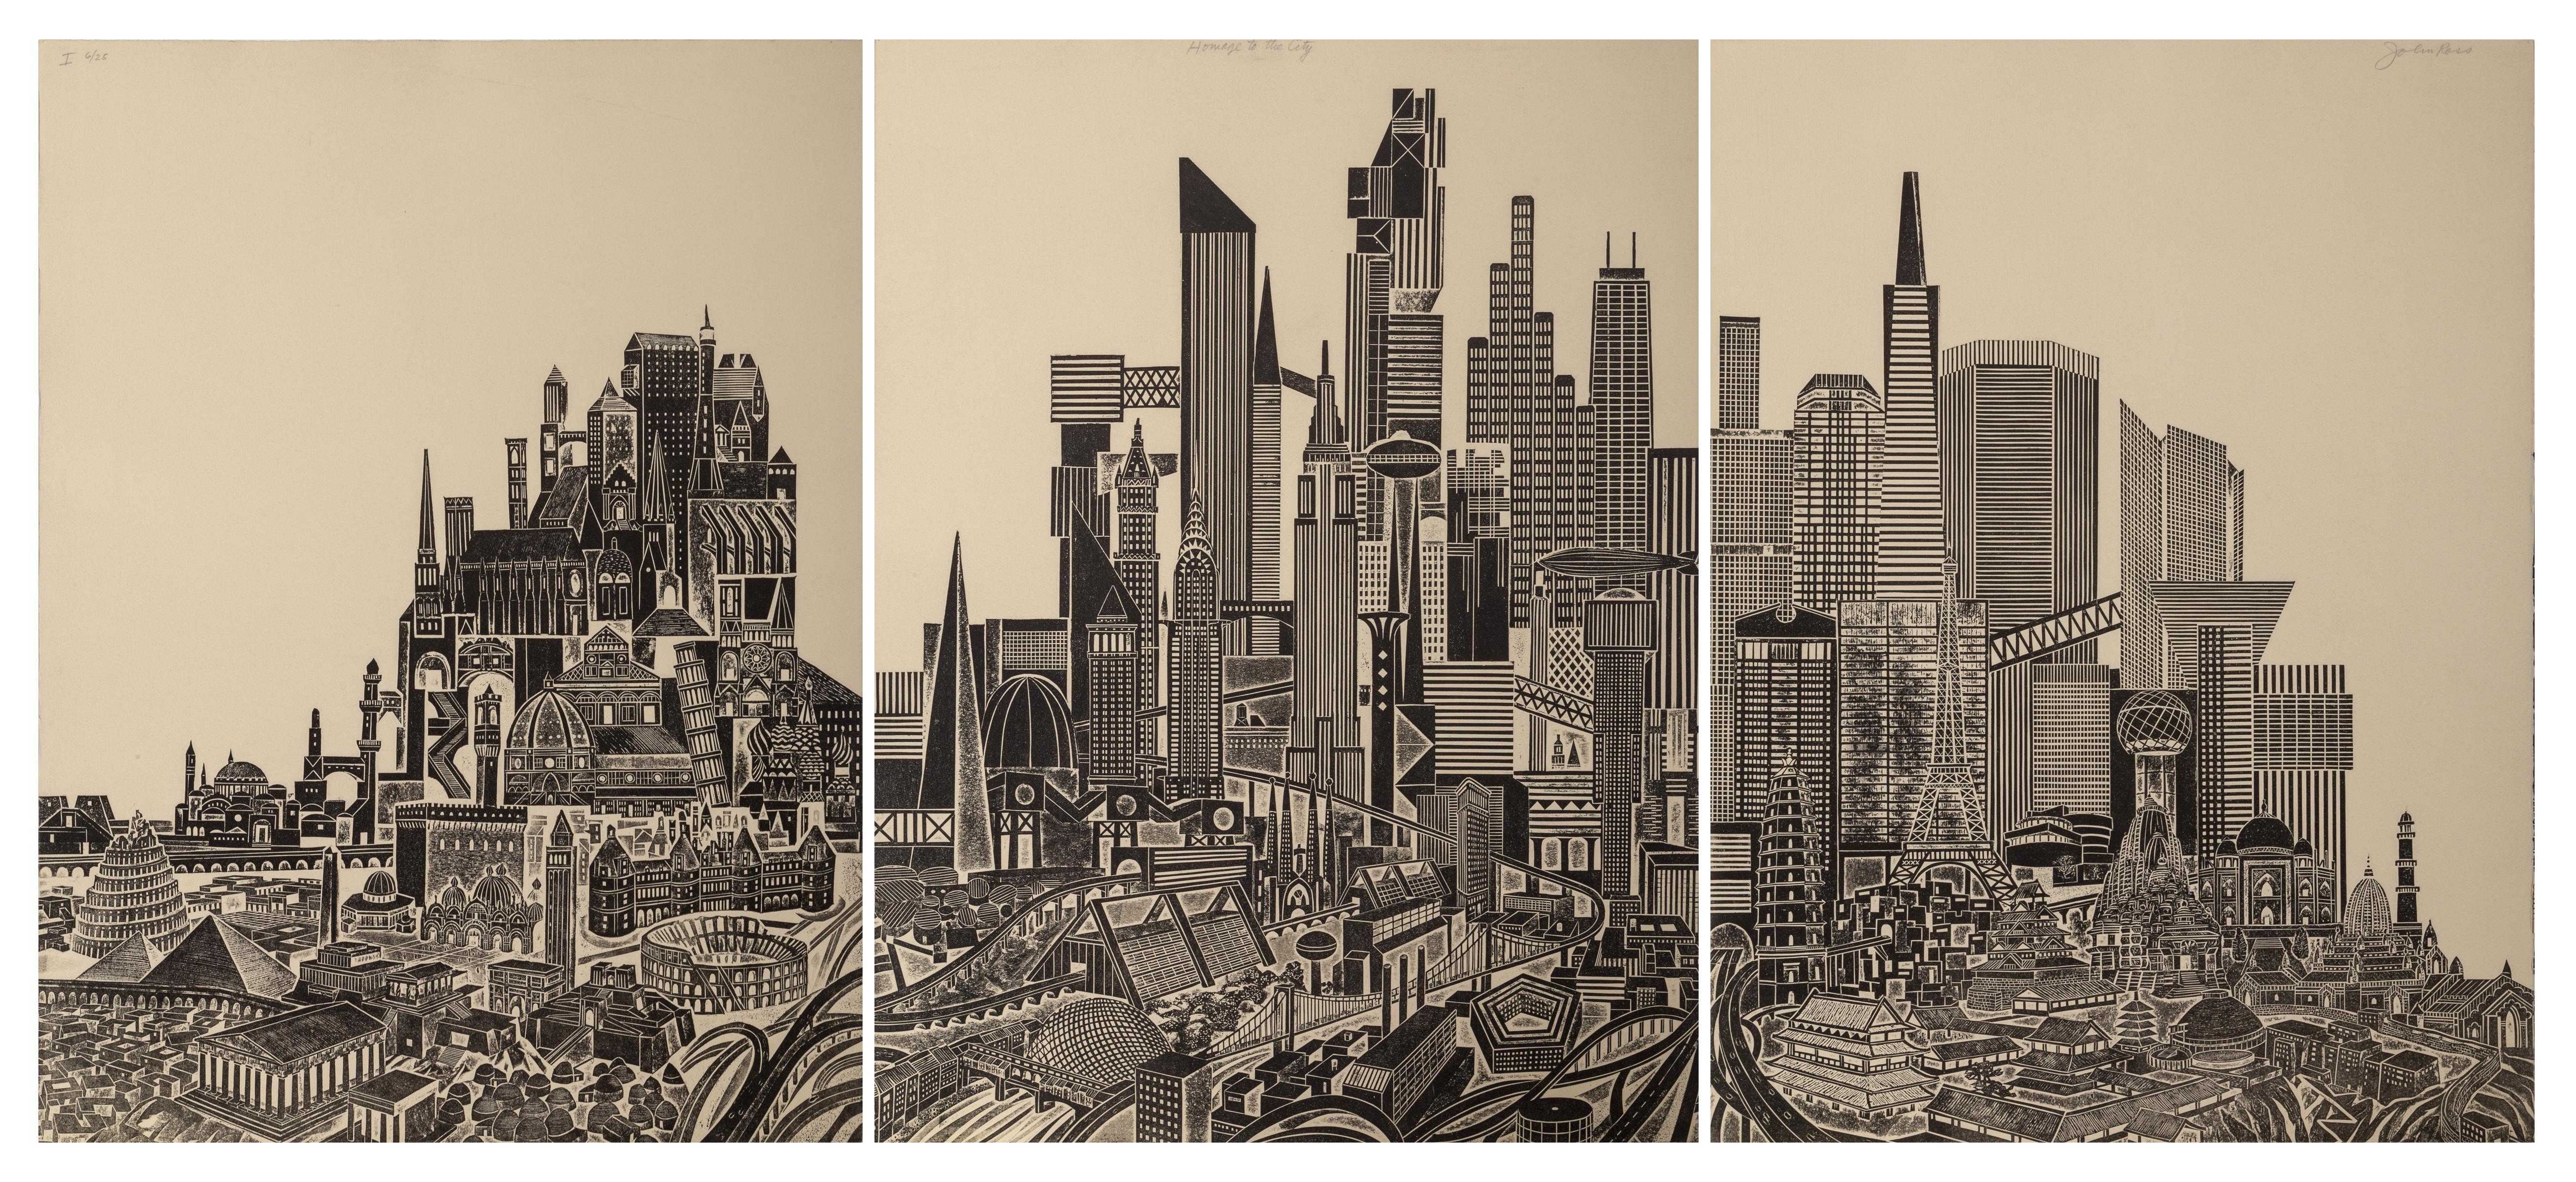 Homage to the City - Day, Triptych